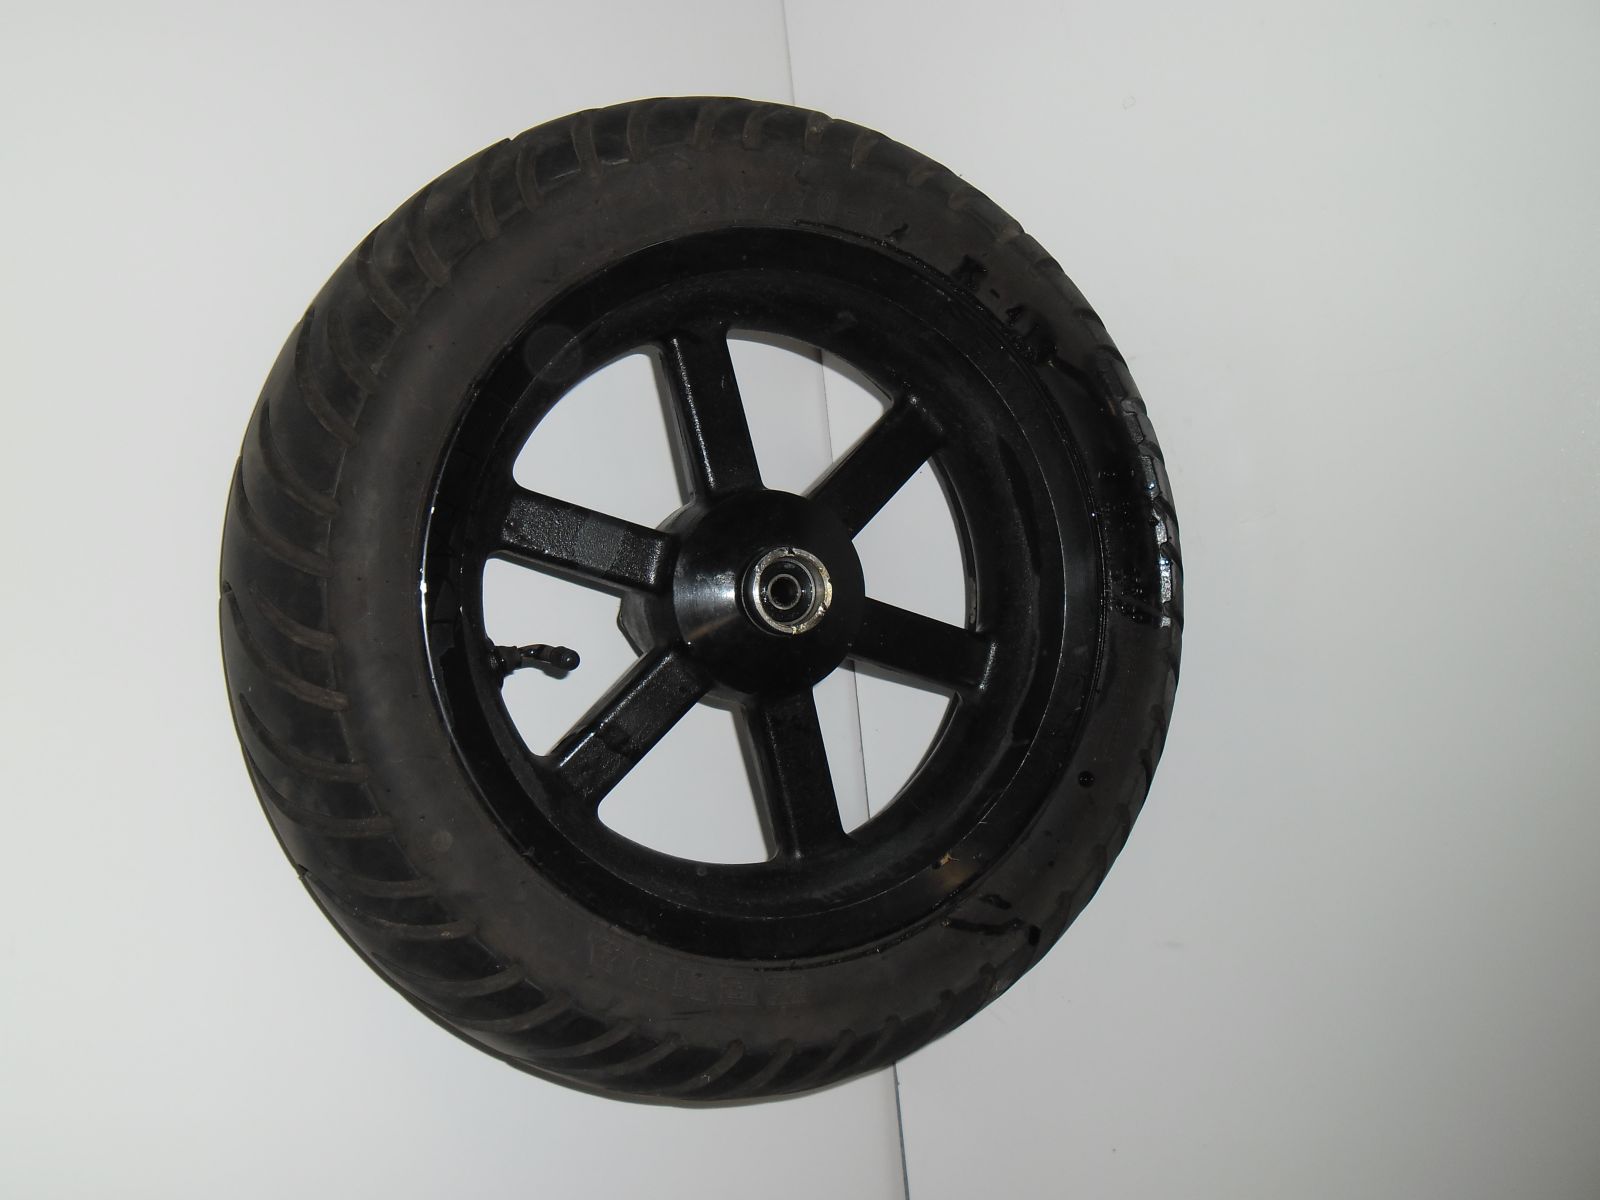 Keeway F-act front wheel and tire